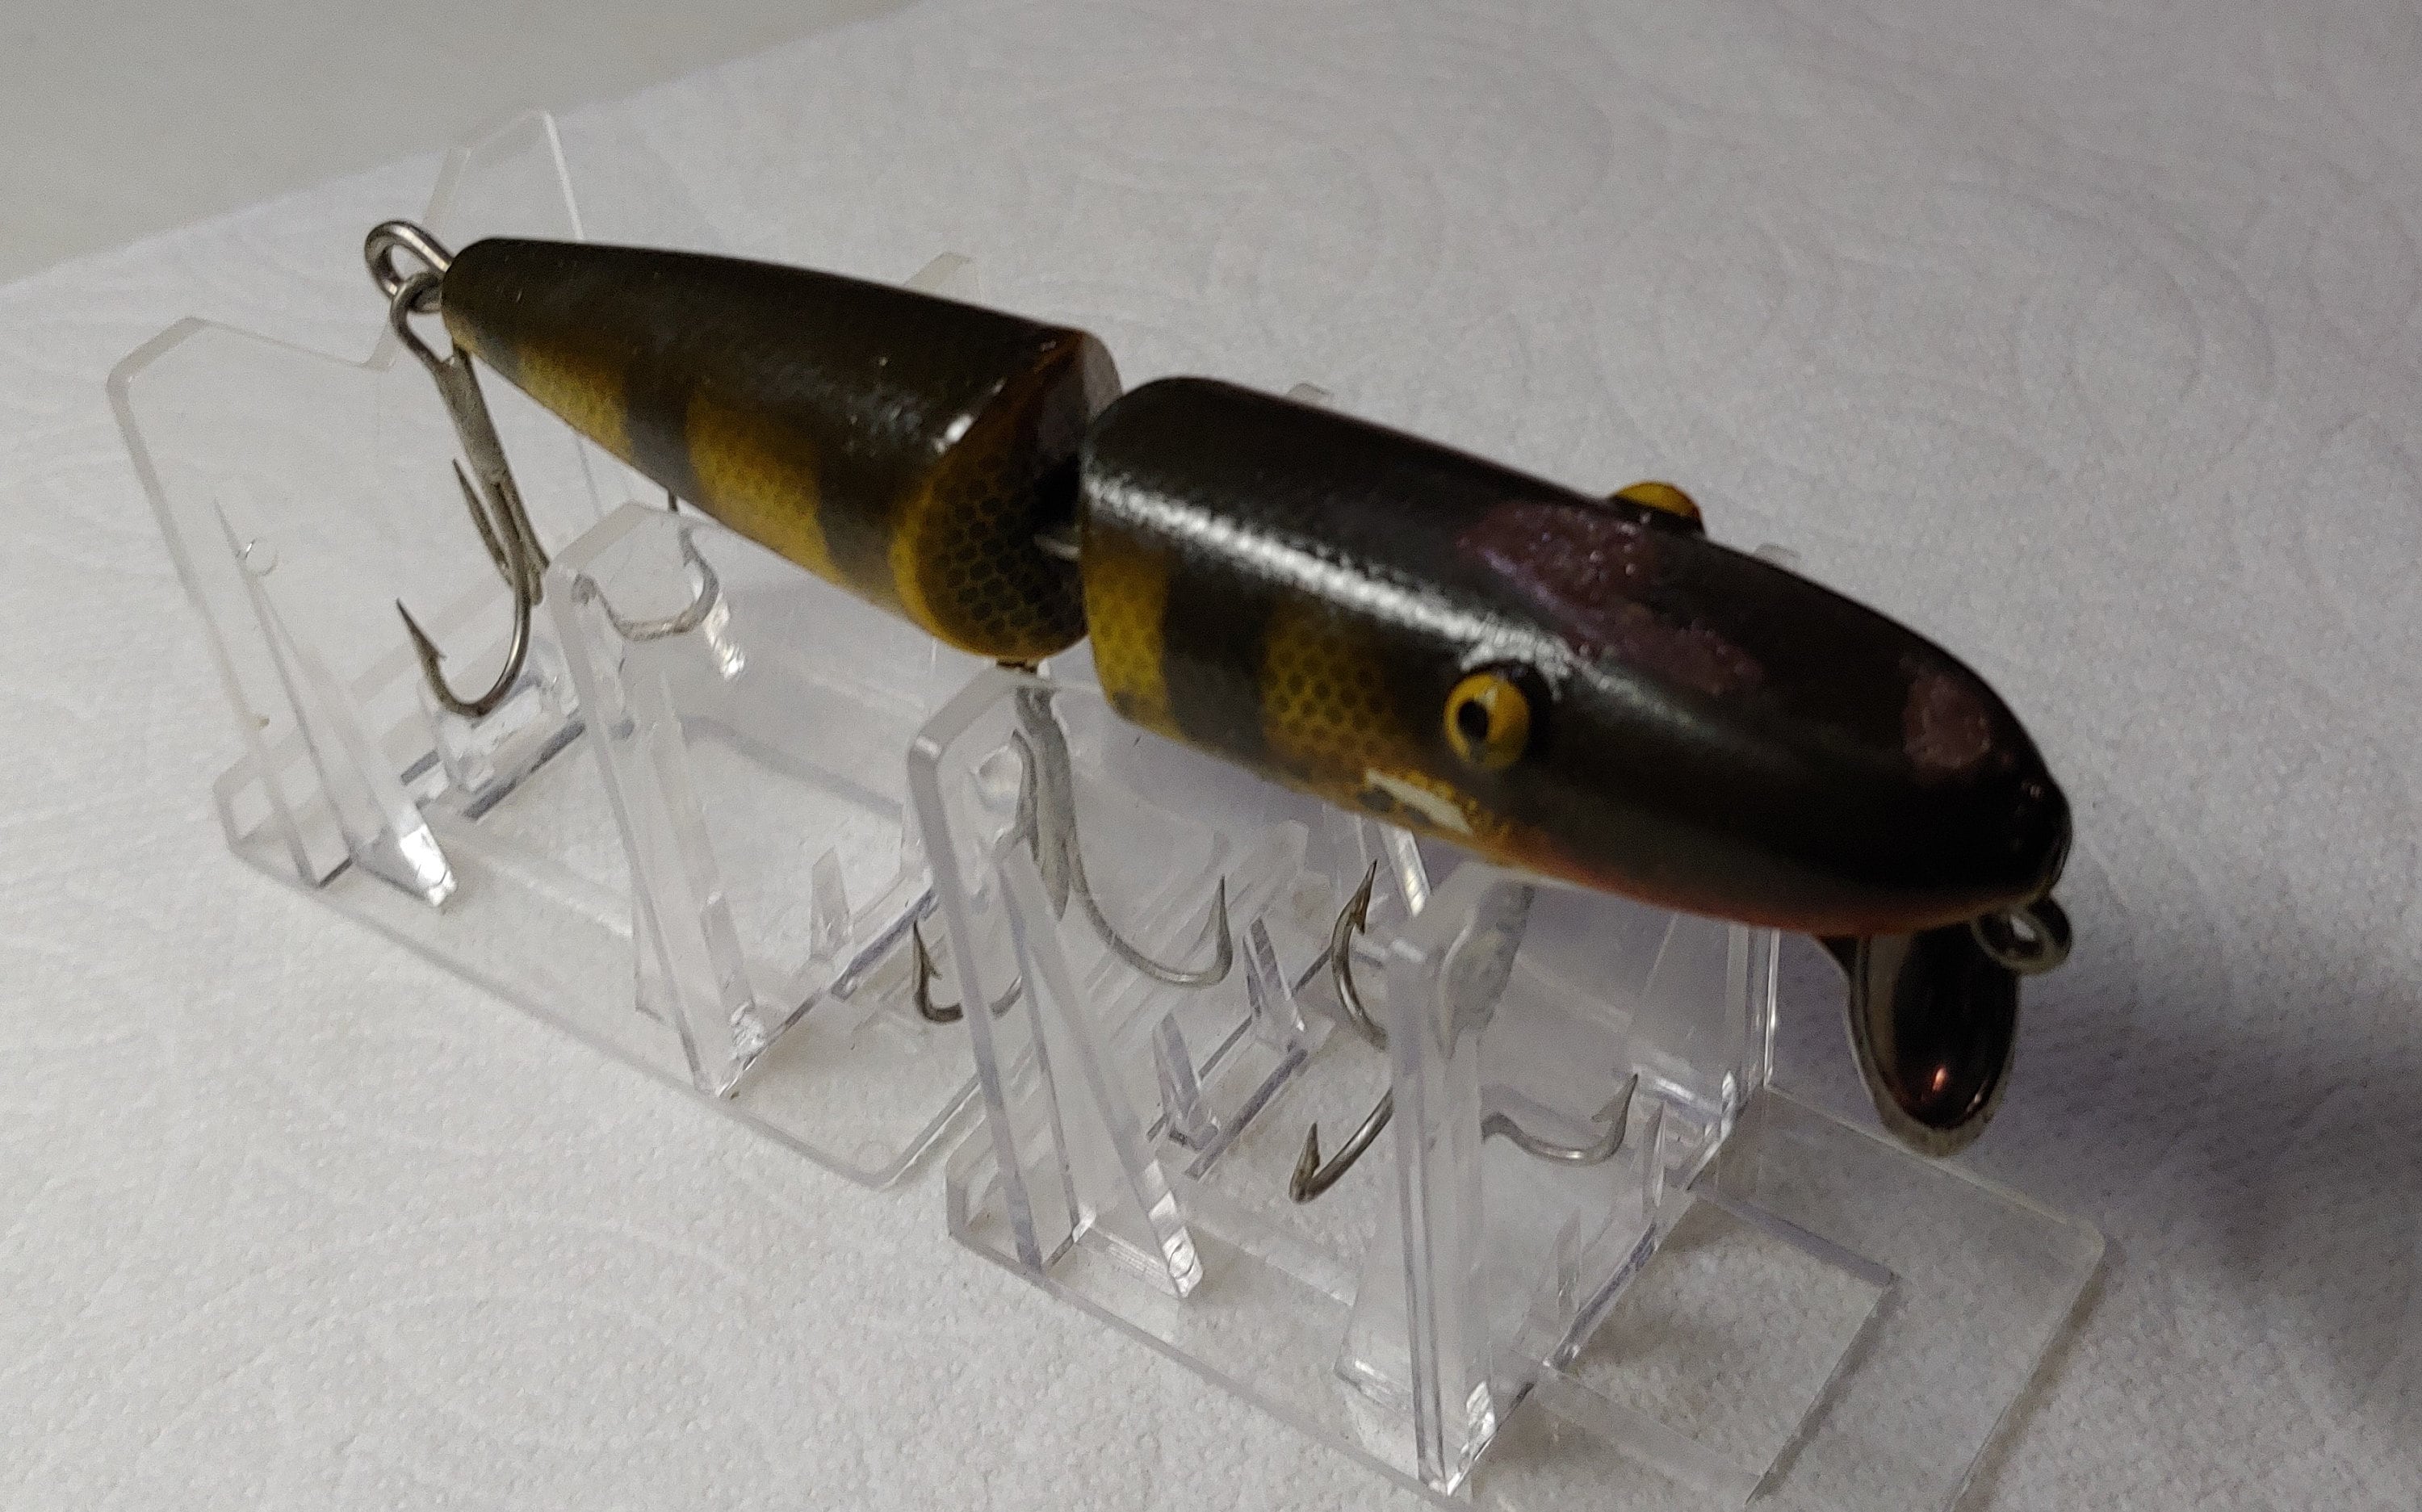 Vintage 1980s Fishing Lure: Mann's Deep Diving Loudmouth Rattling